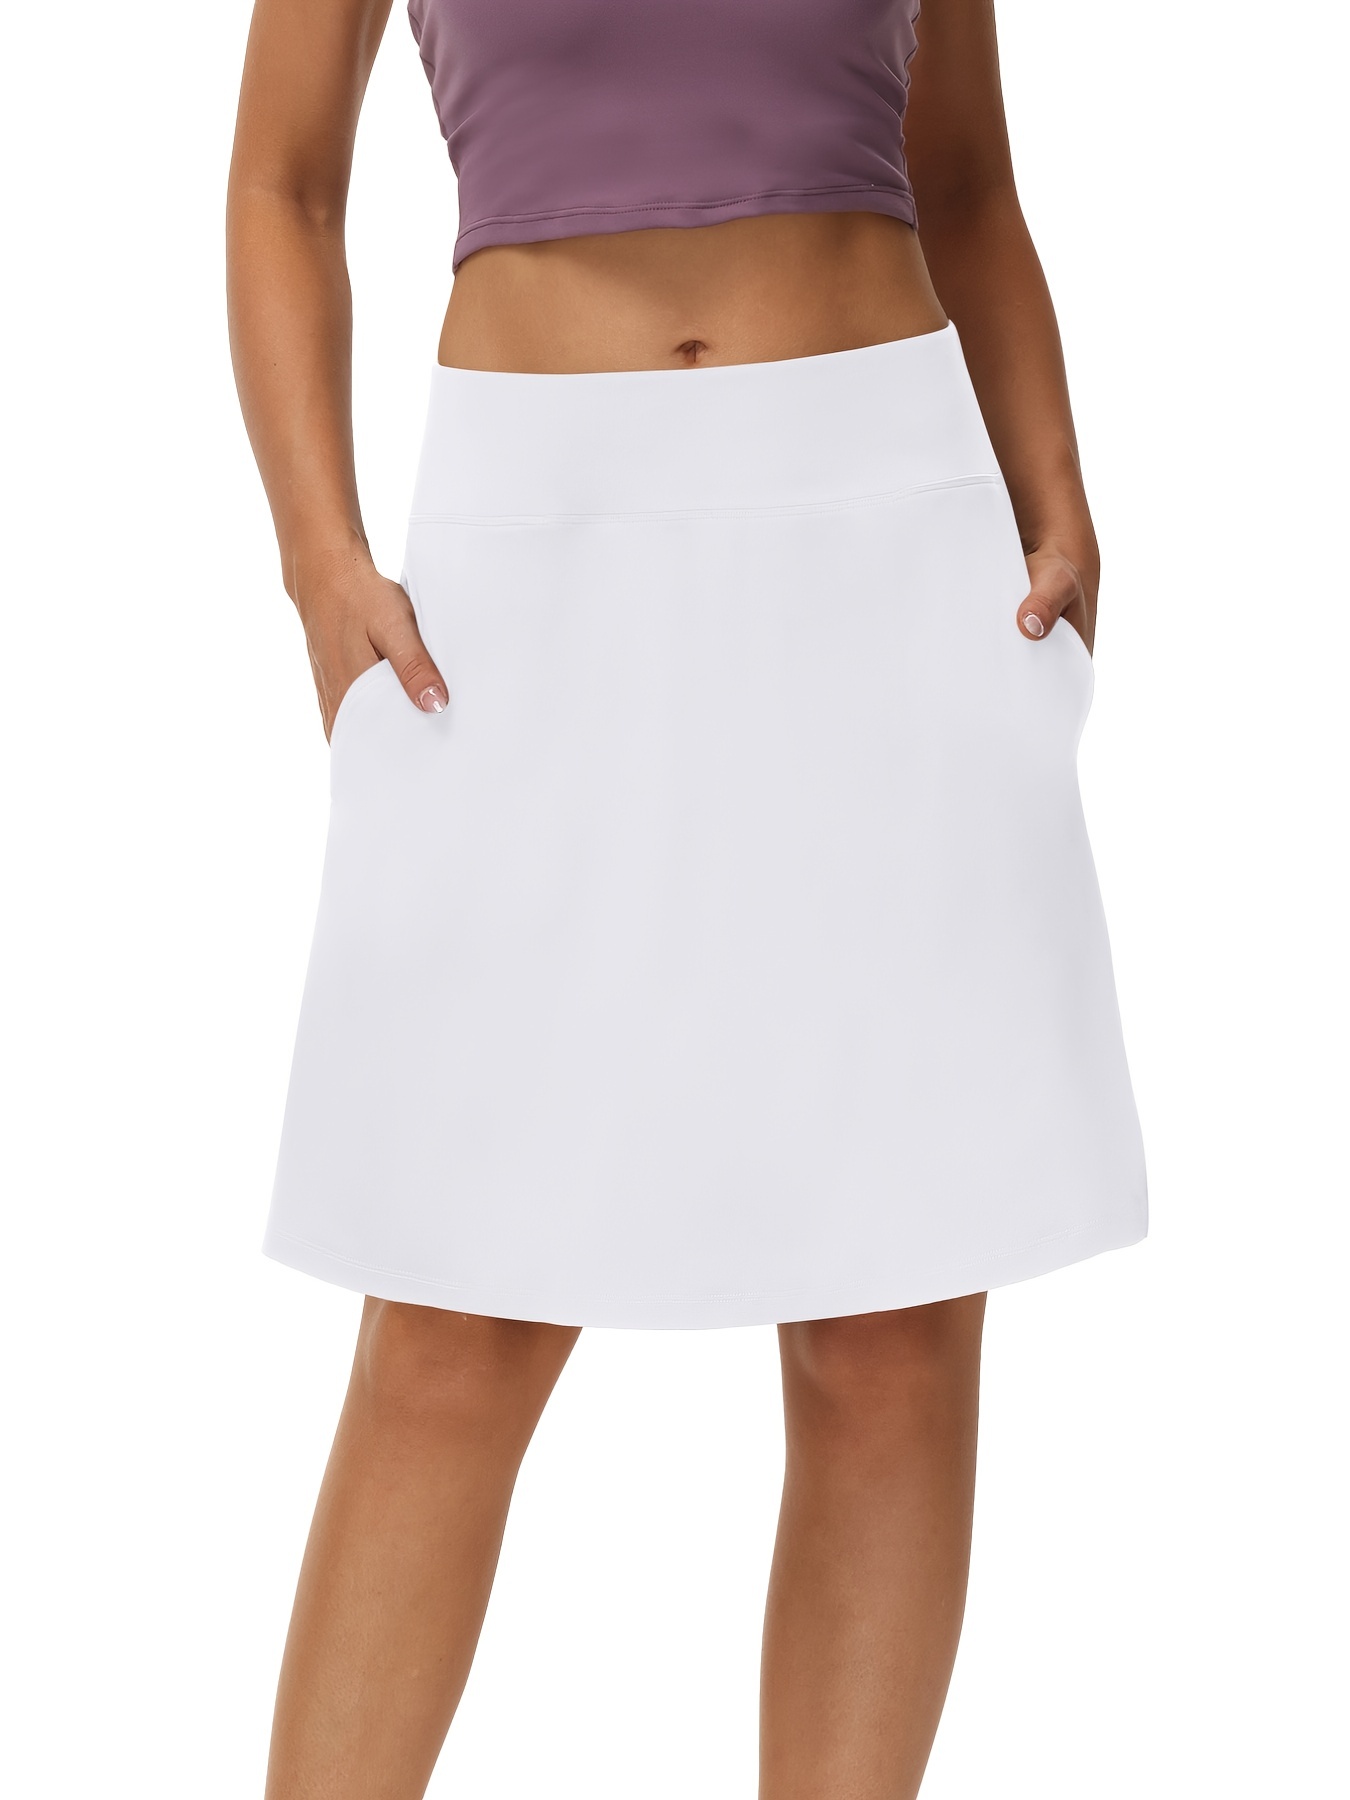 Kcocoo Womens Summer Athletic Tennis Skirt Golf Skorts For Women With  Pockets Polyester Wine S 